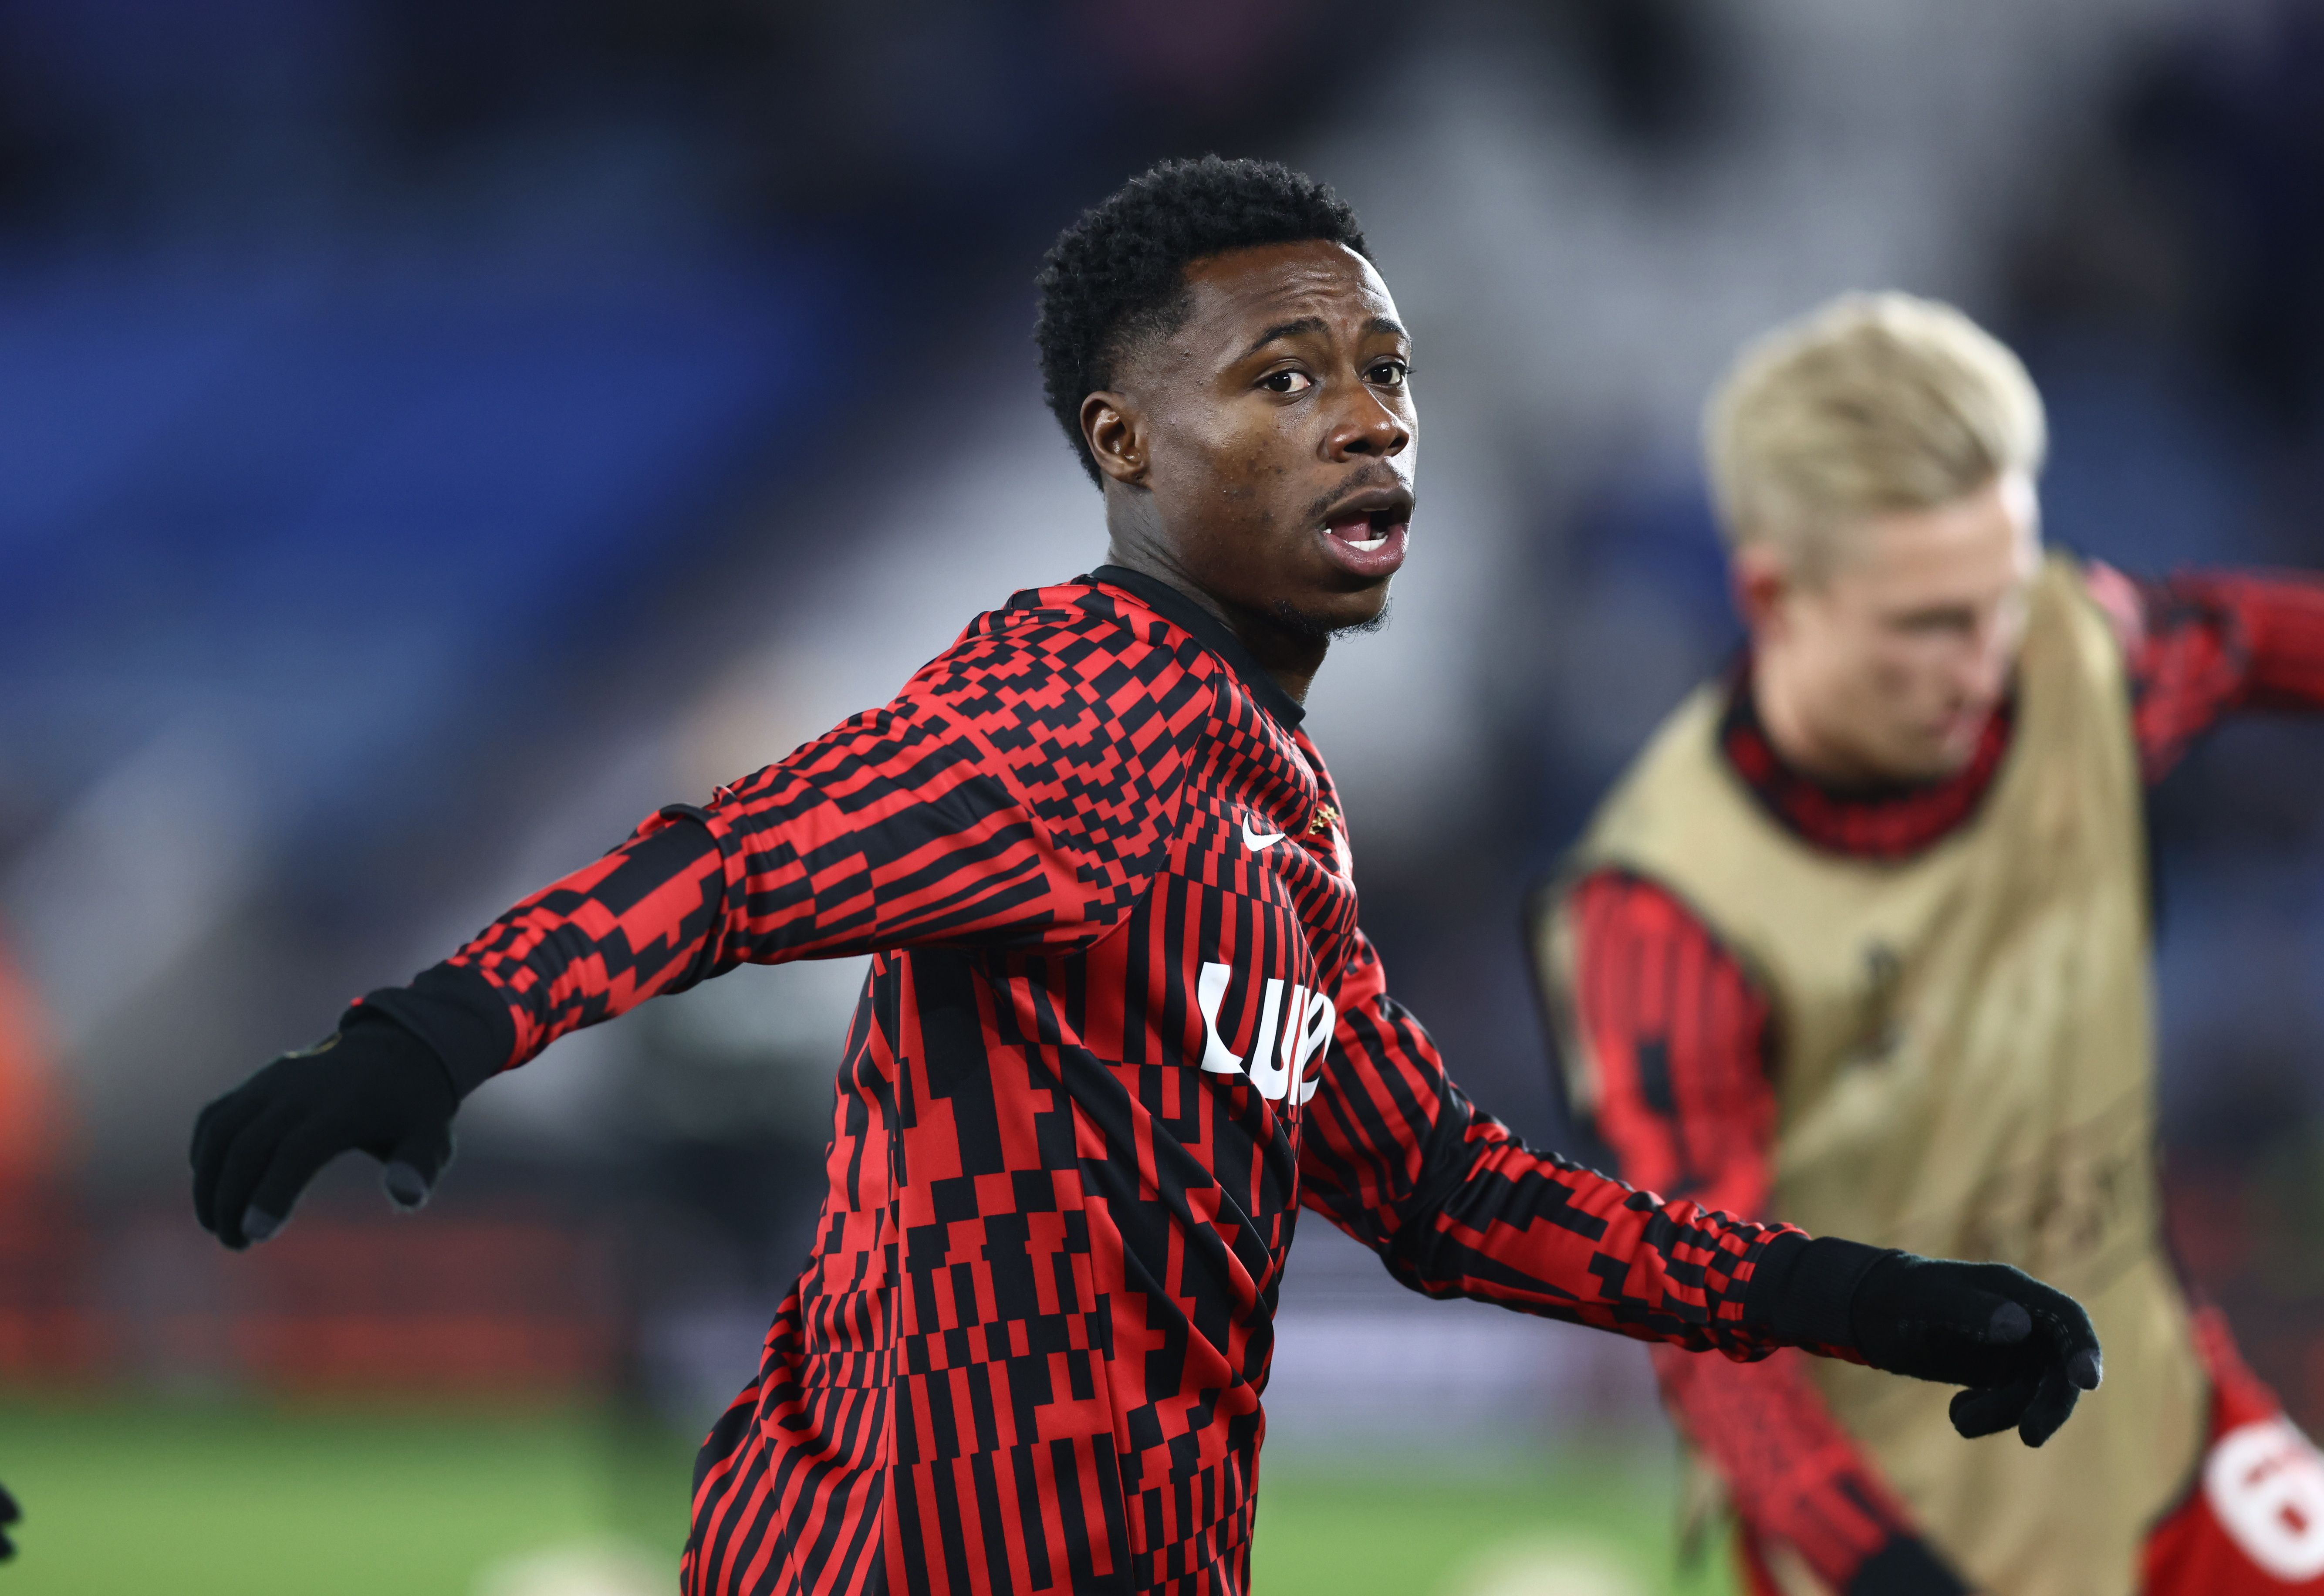 Quincy Promes in a Spartak Moscow warm up